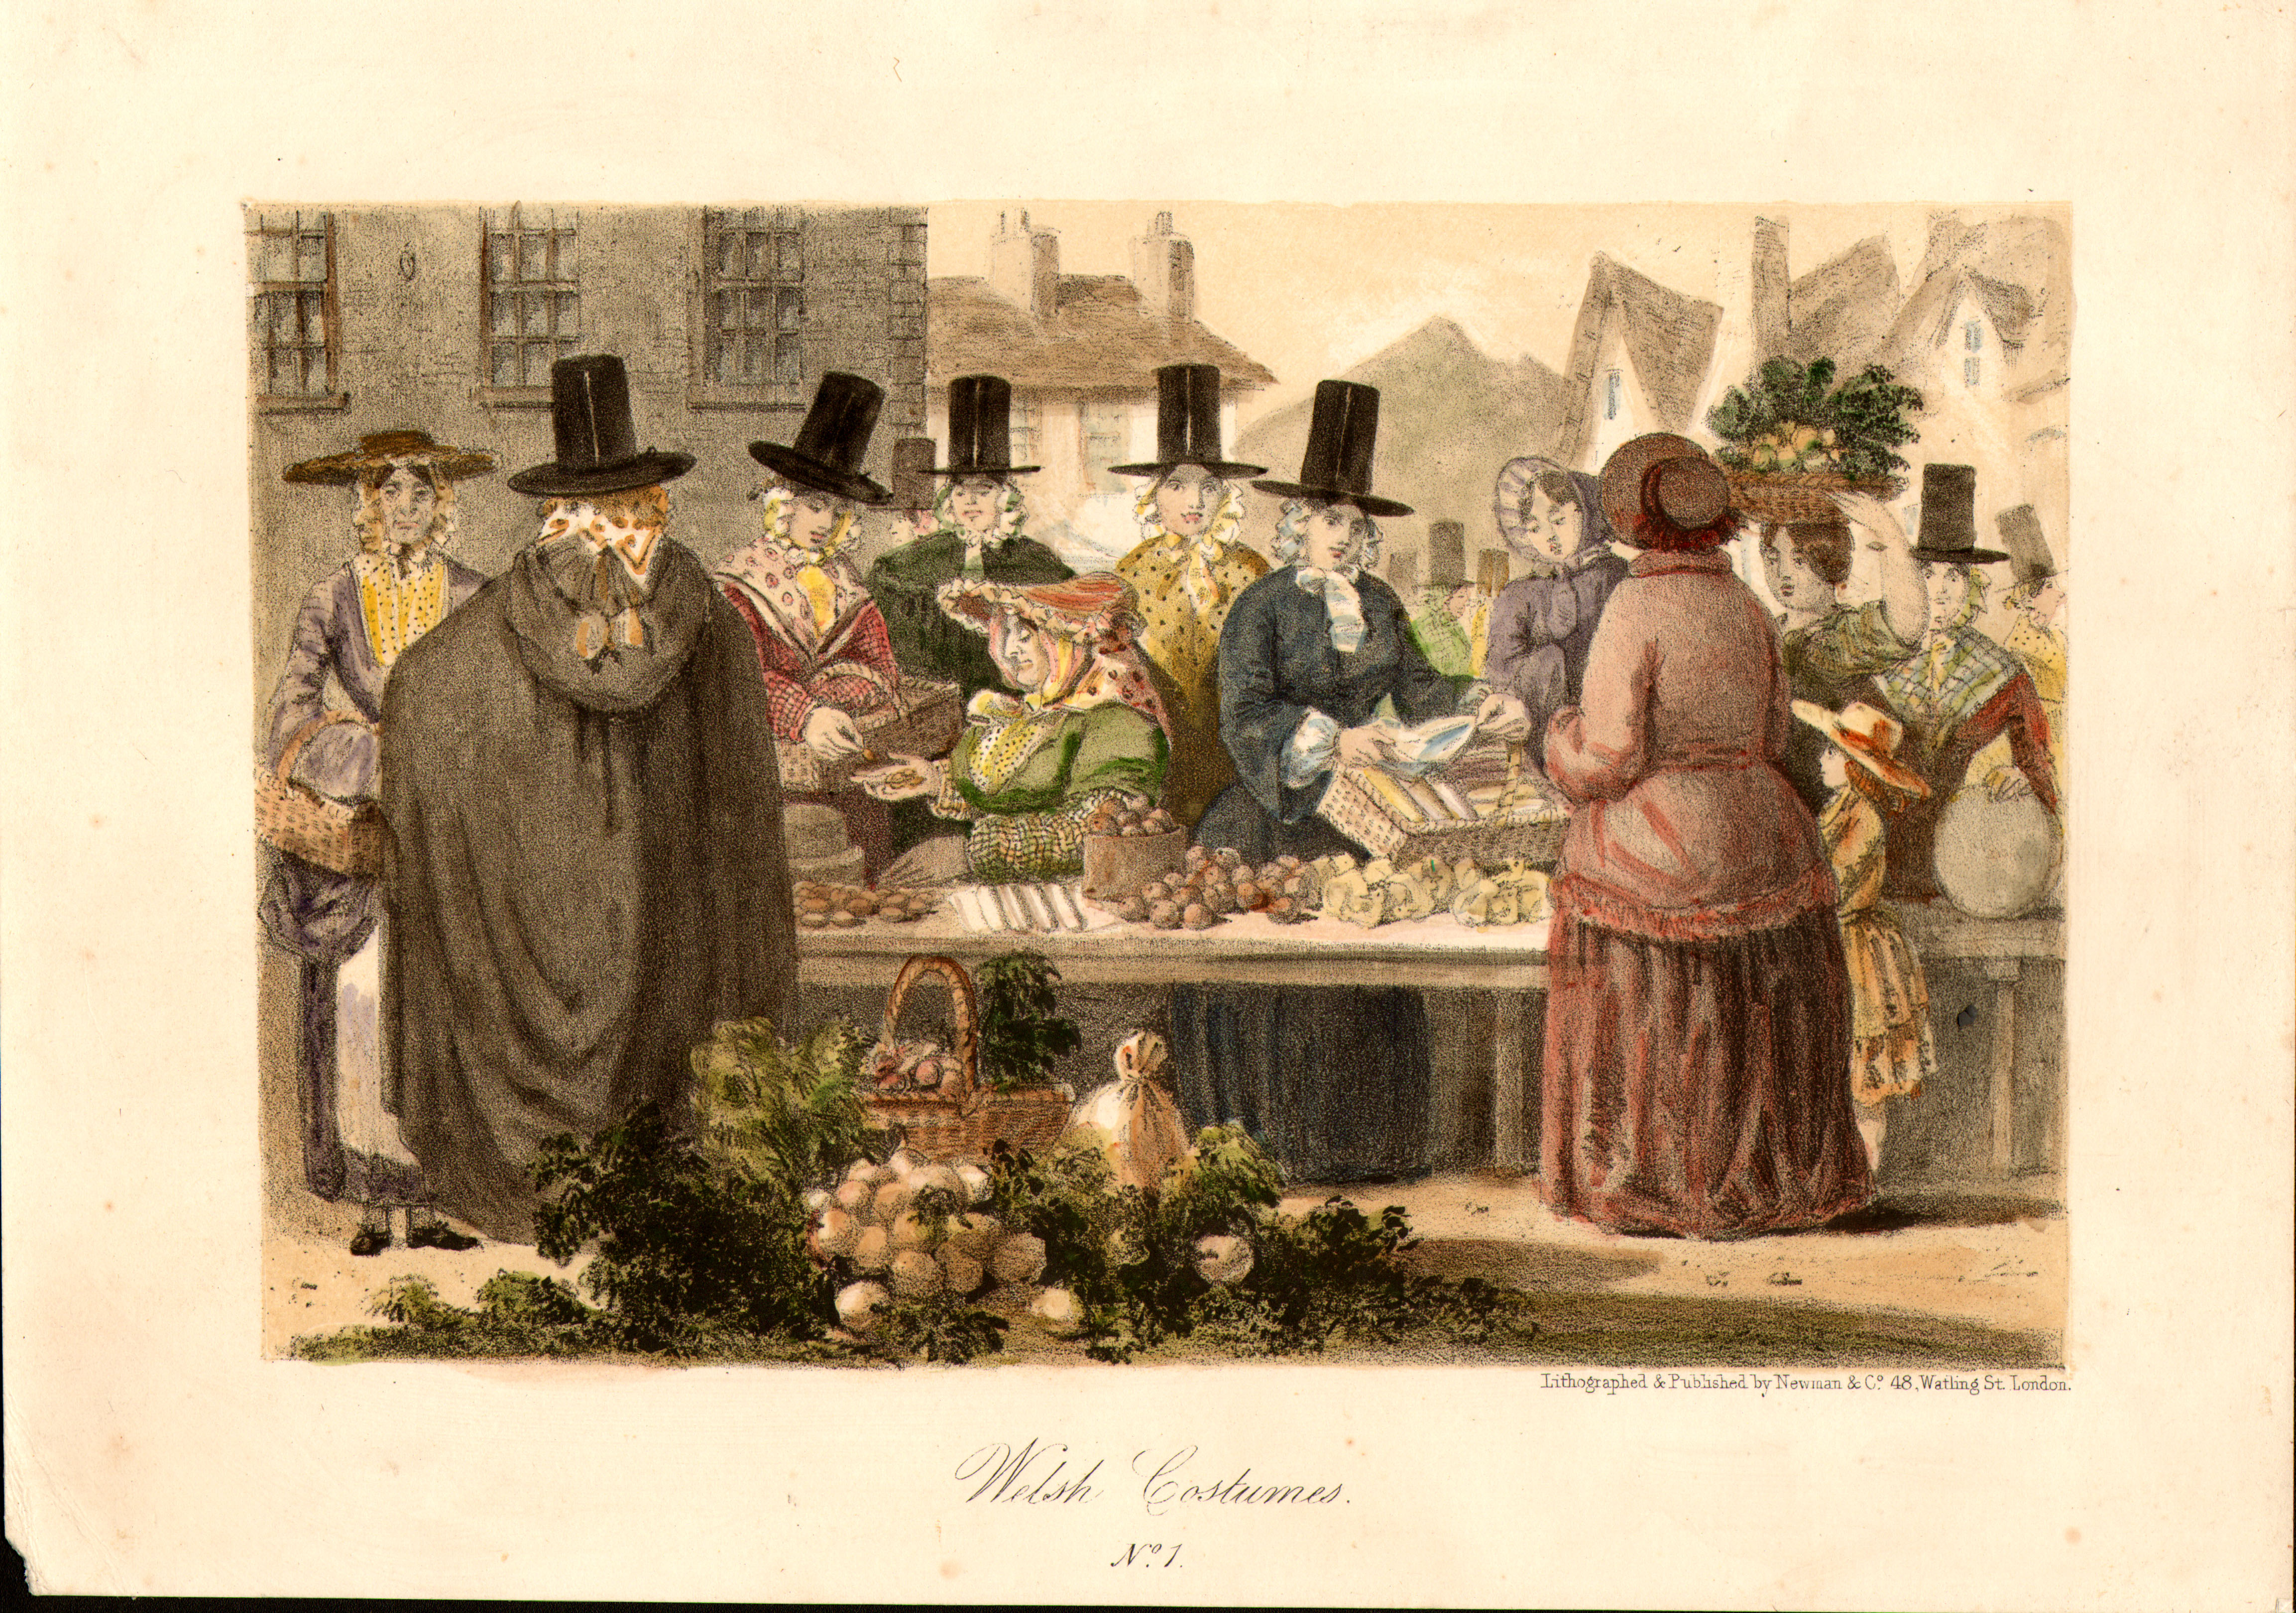 Coloured print of a group of 'Welsh ladies' at the market.